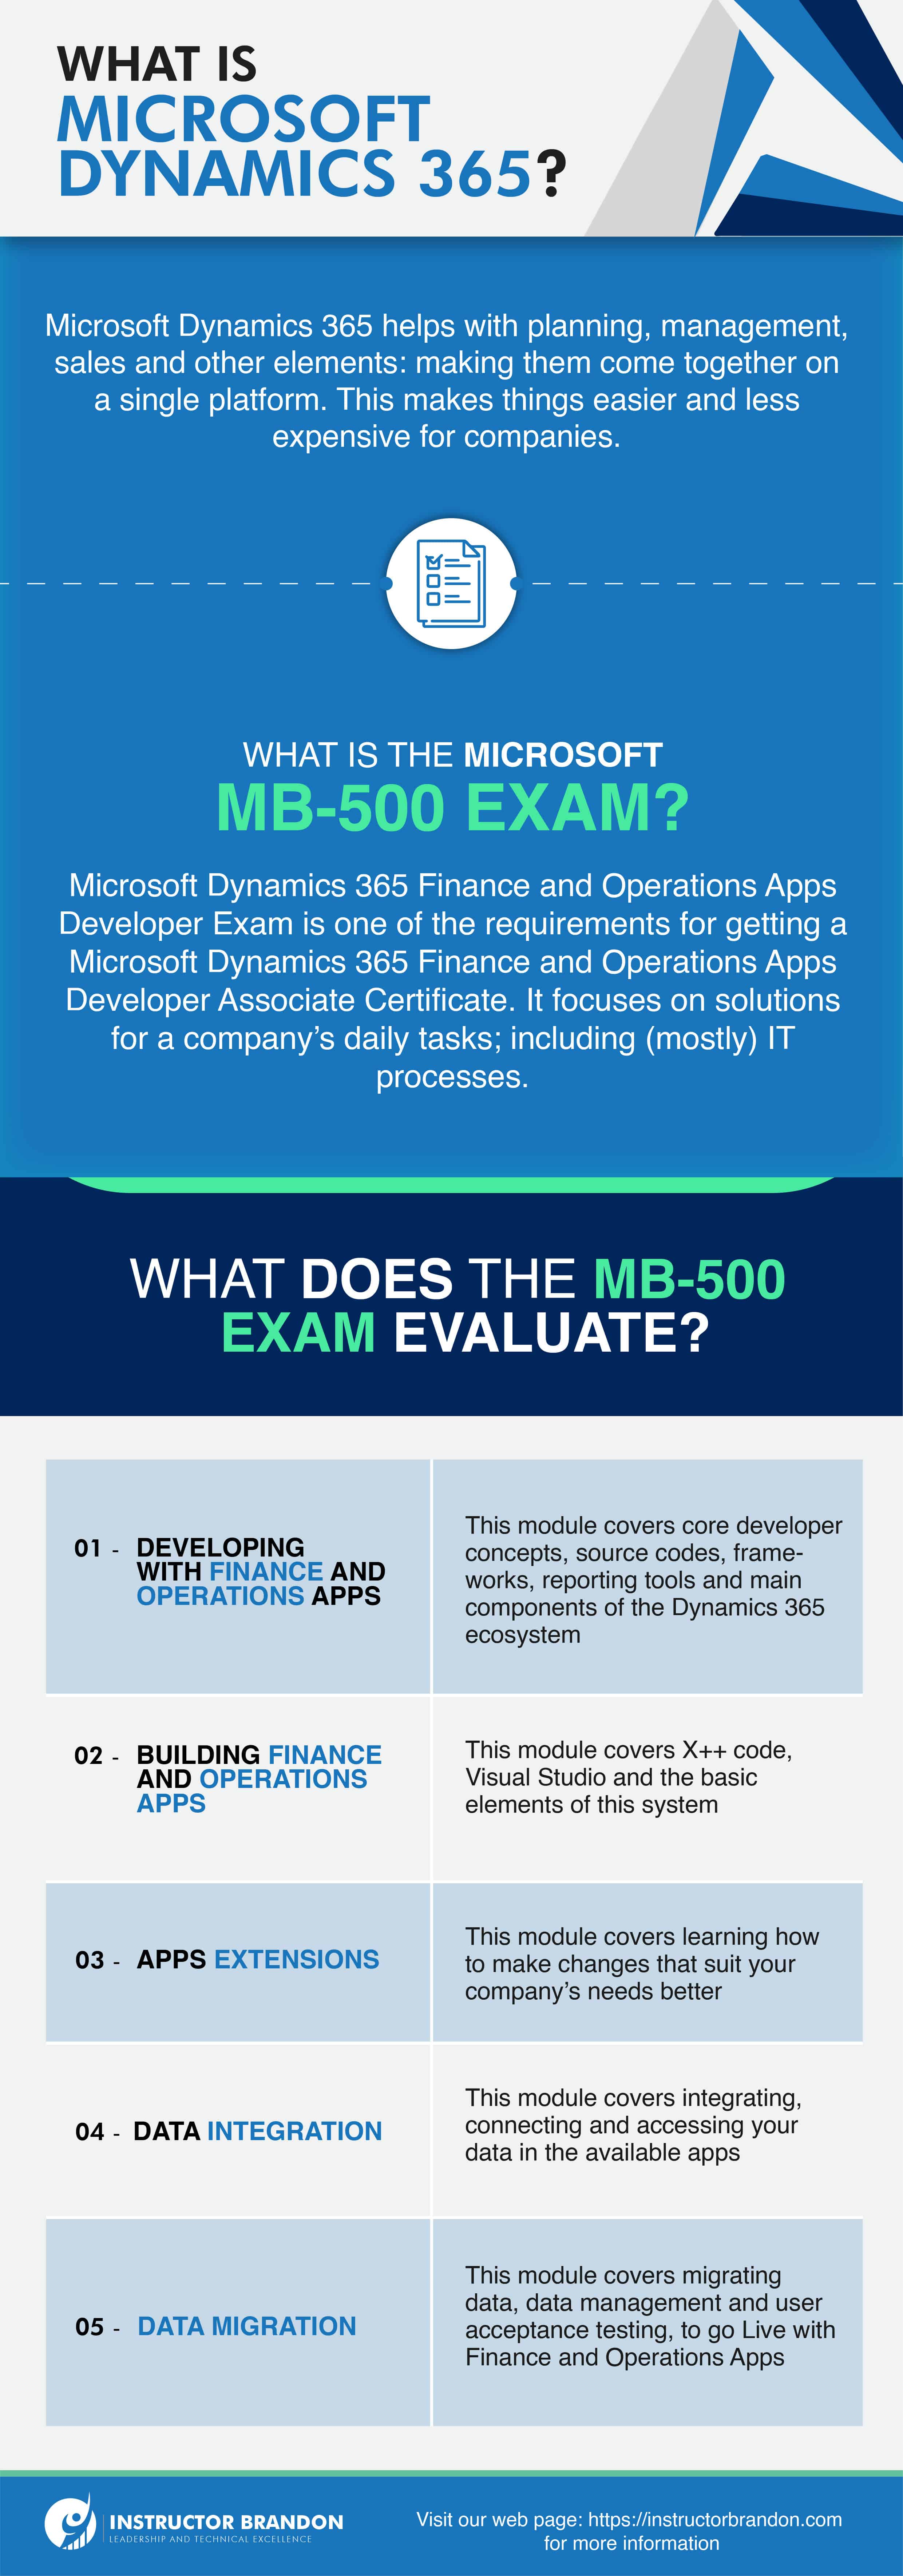 Boost your Dynamics 365 Career with MB-500 Exam Training